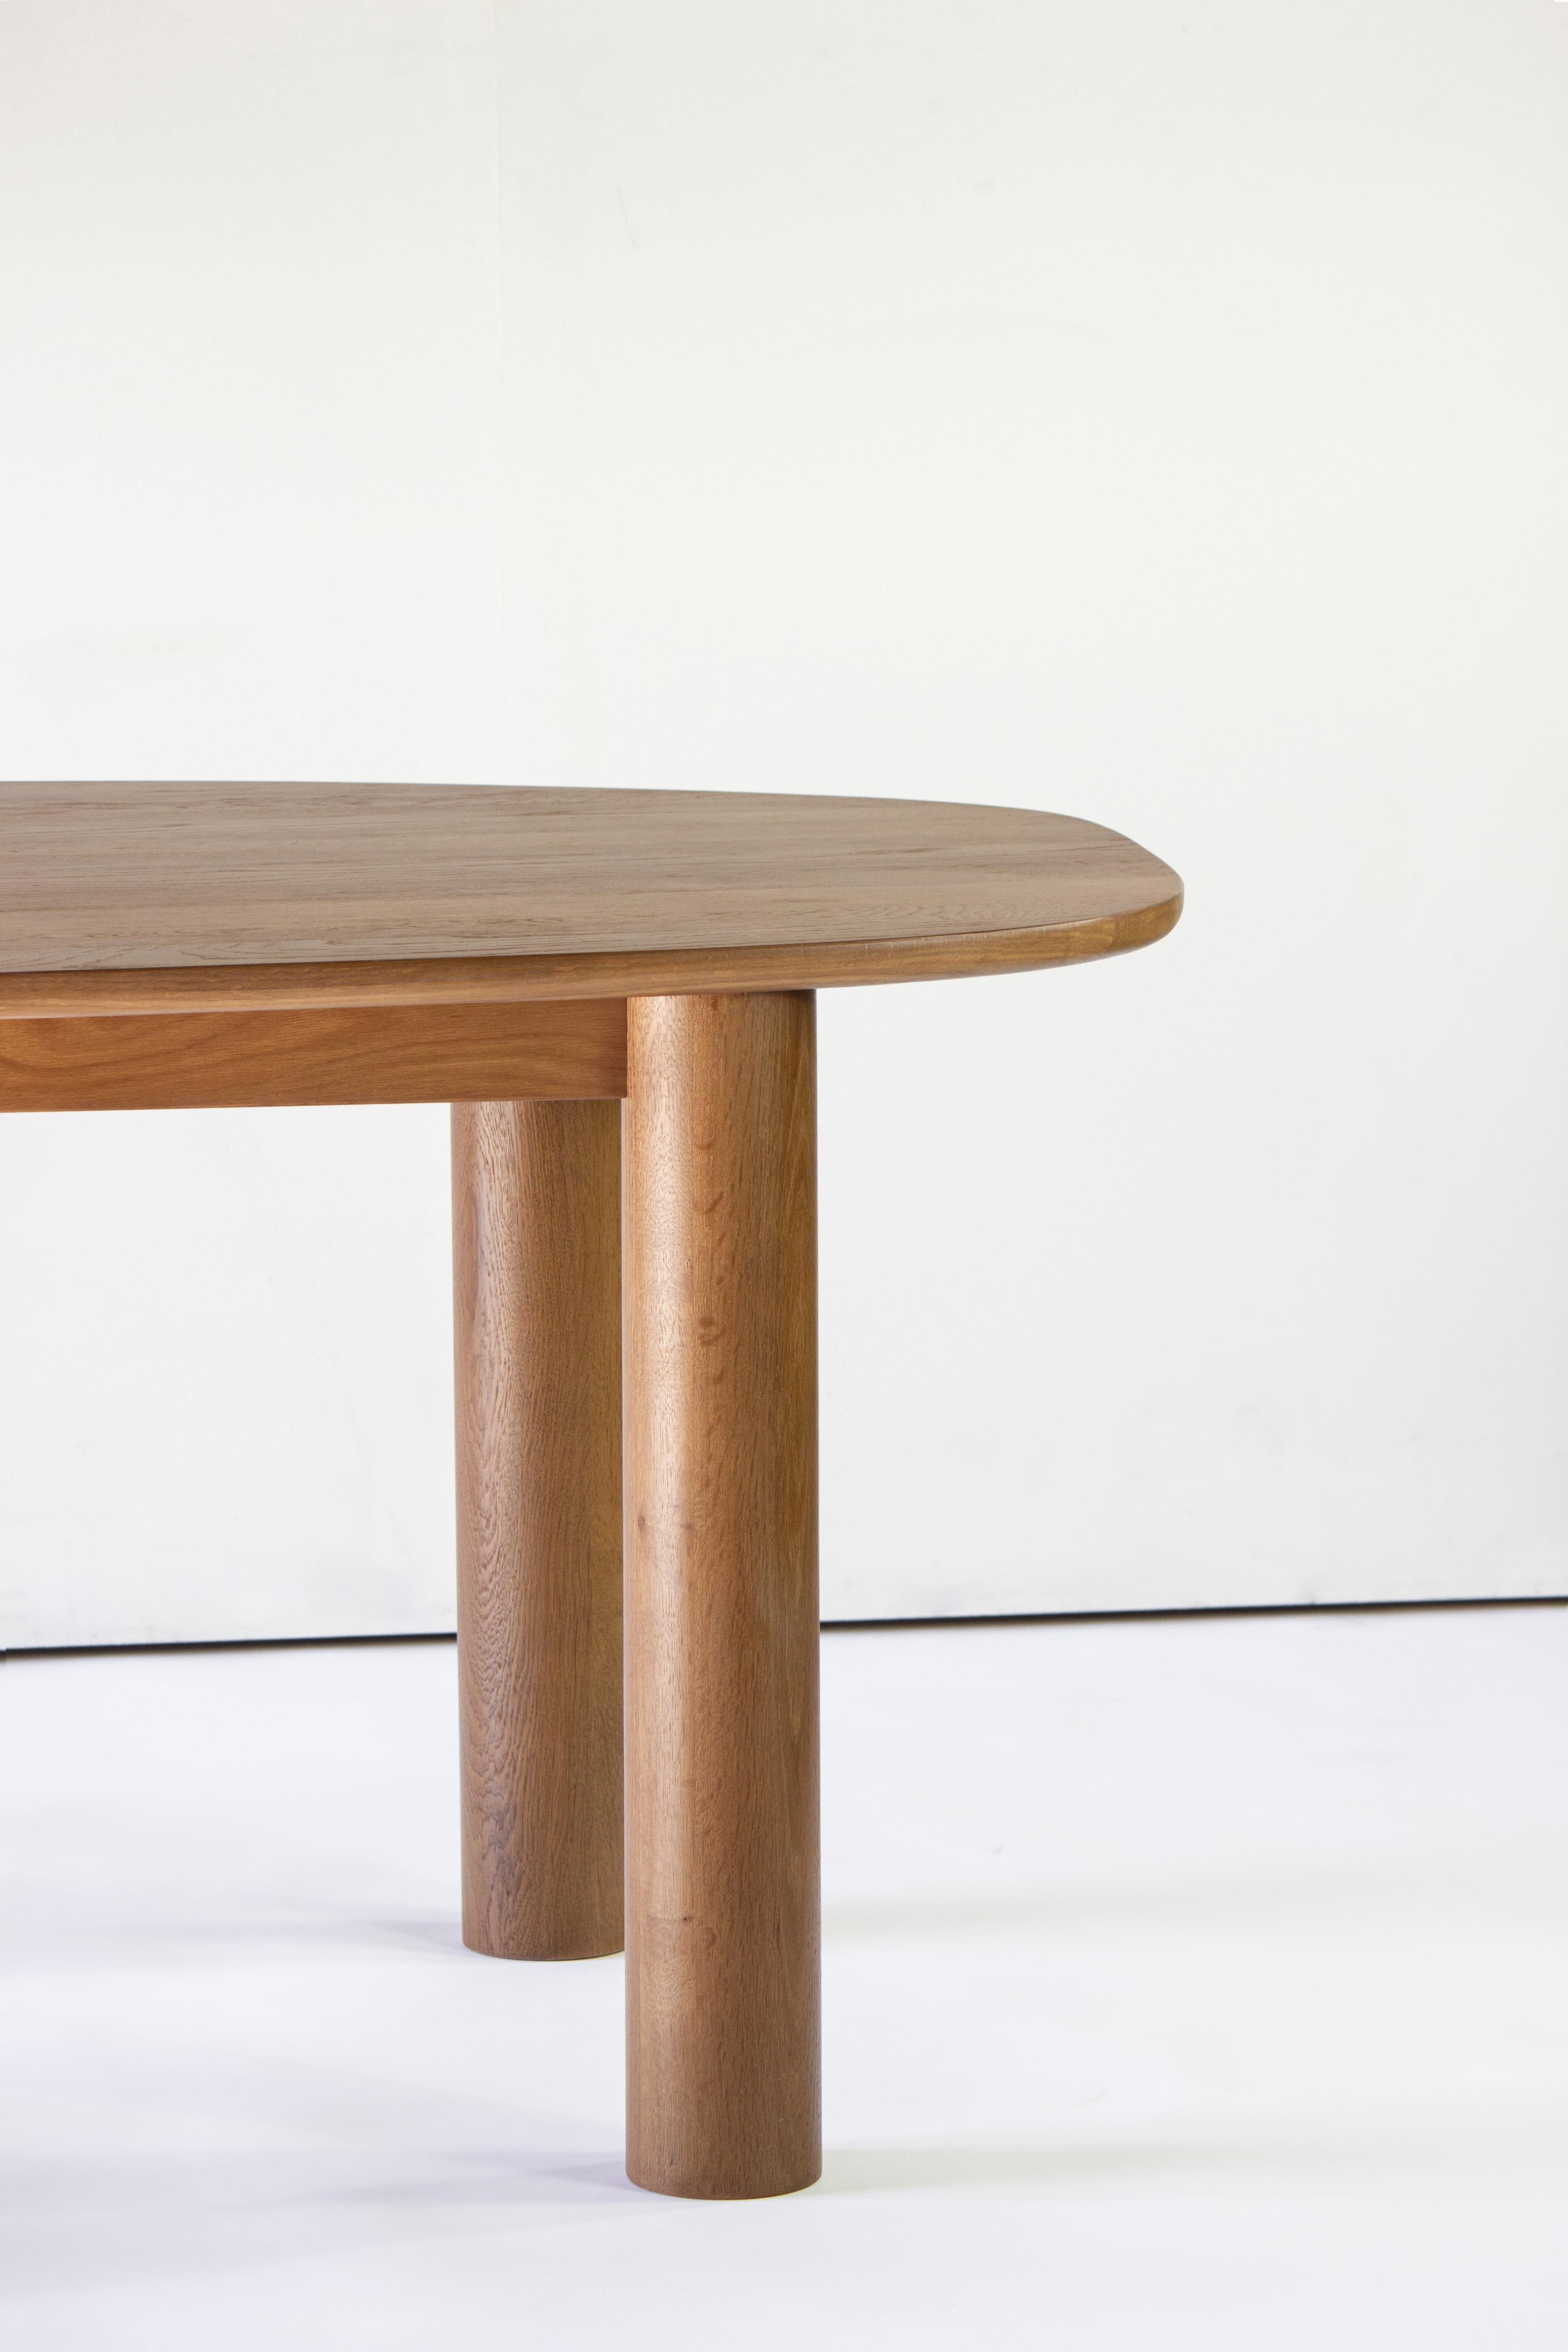 Joinery Ohm Dining Table, Sienna, Minimalist Dining Table in Wood